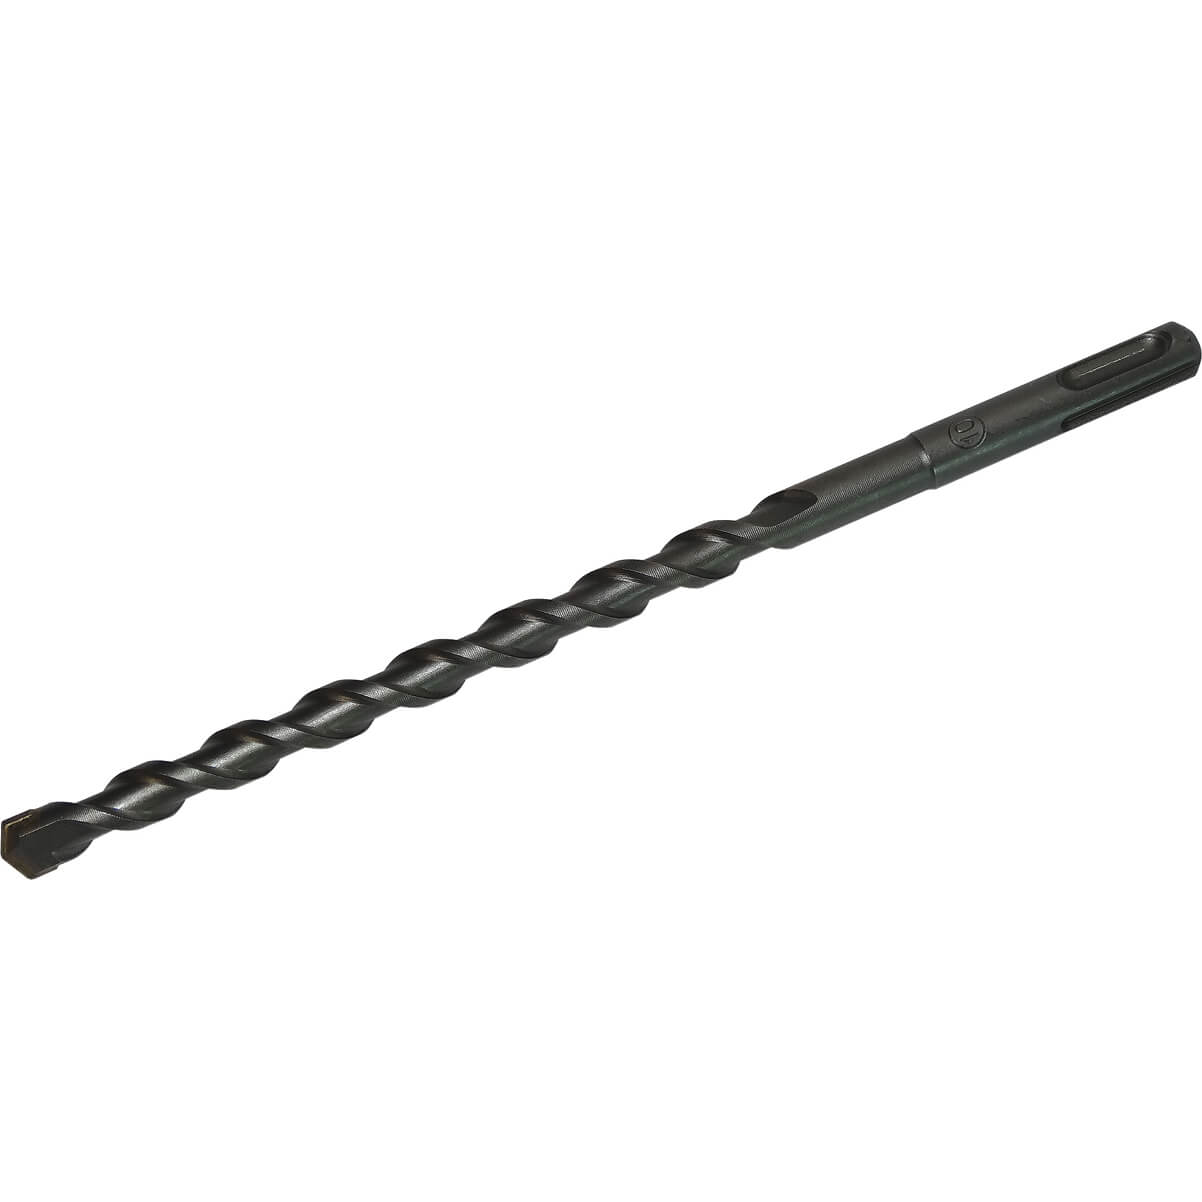 Image of CK SDS Plus Masonry Drill Bit 25mm 1000mm Pack of 1